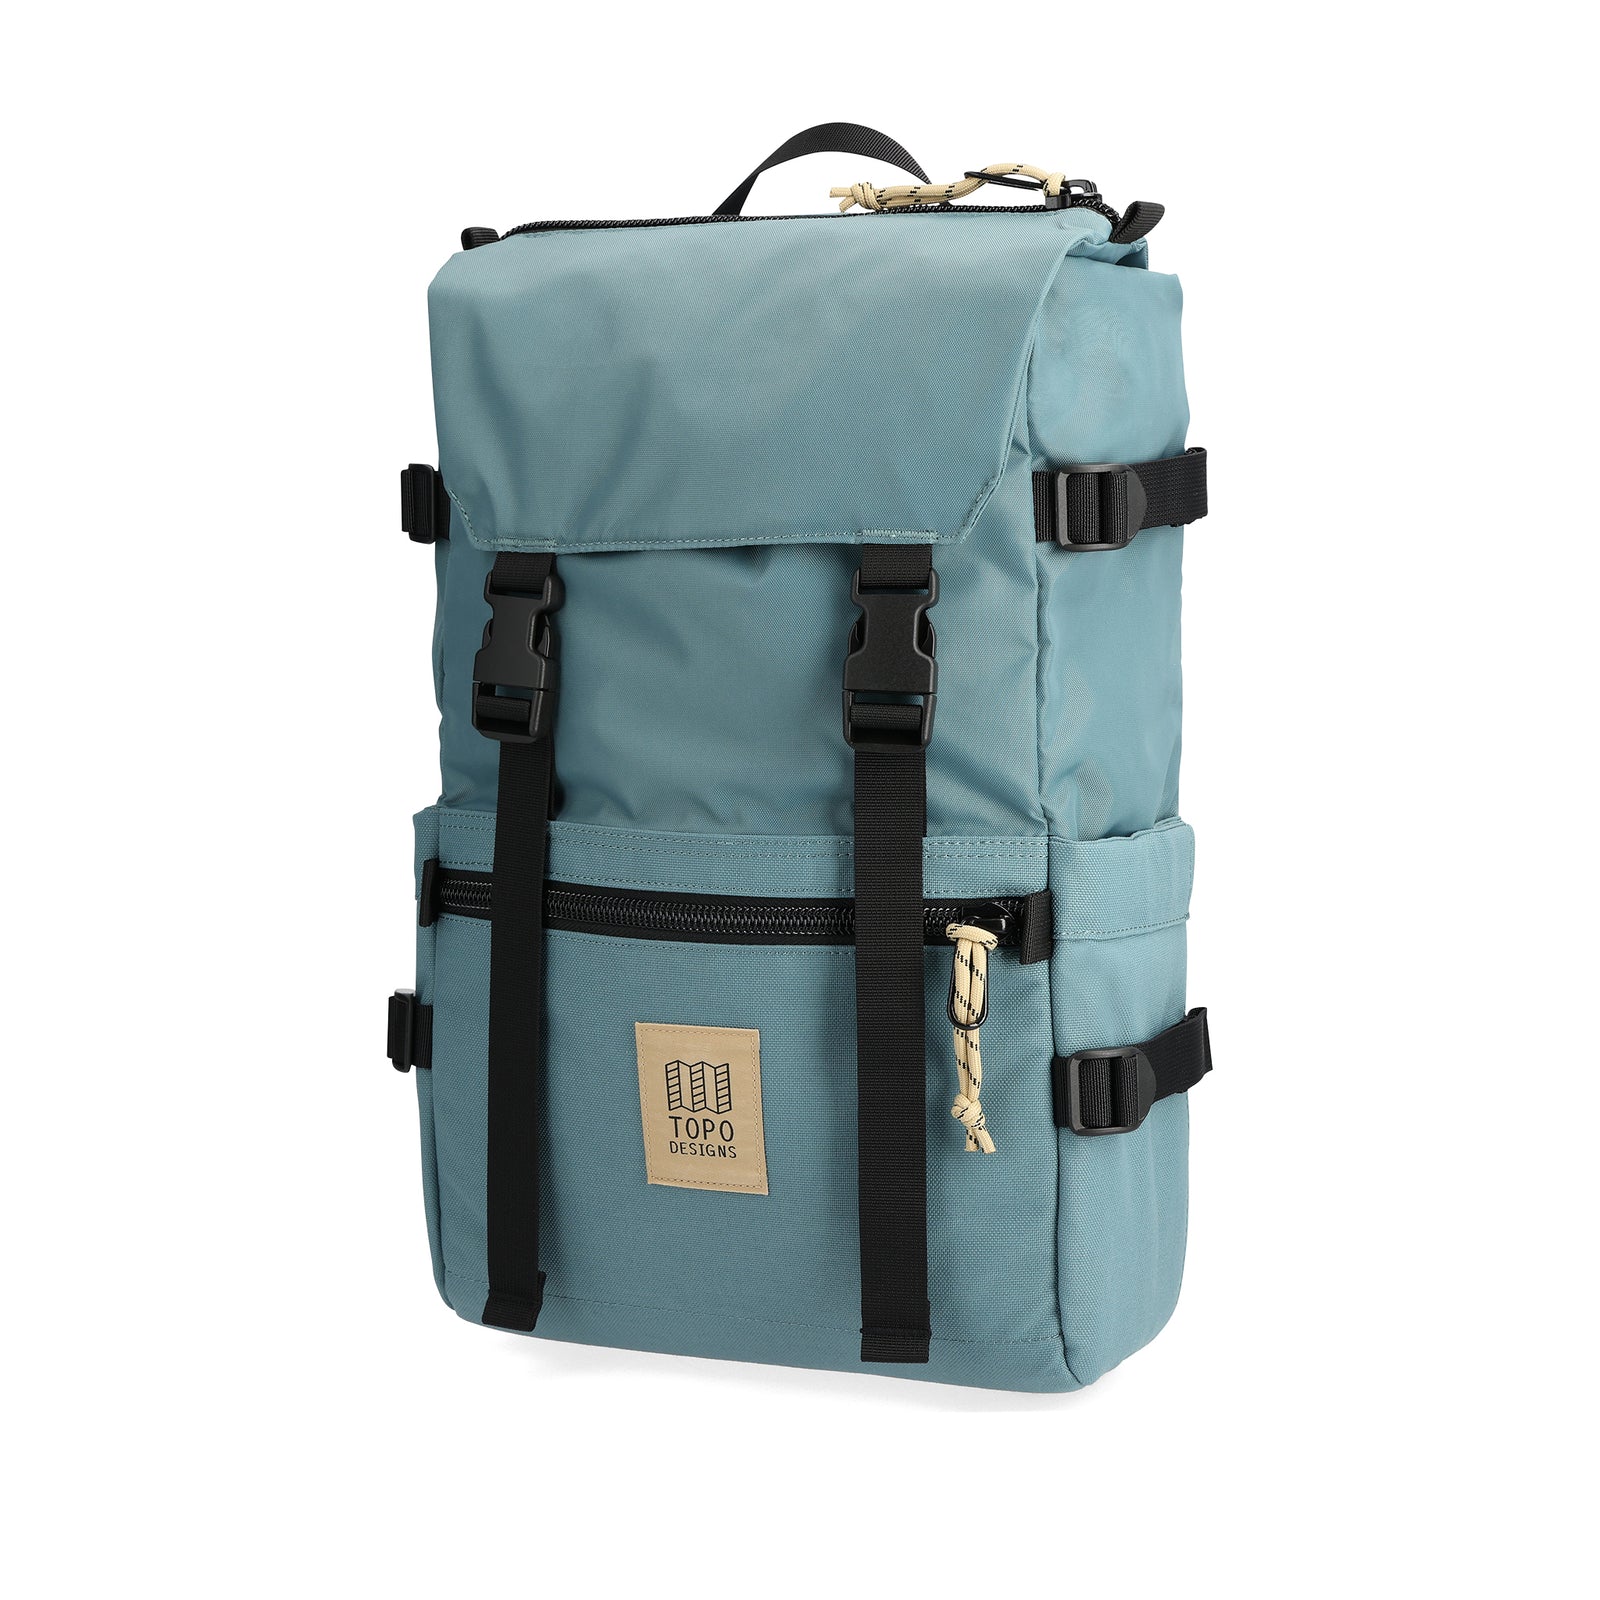 Front View of Topo Designs Rover Pack Classic in "Sea Pine"